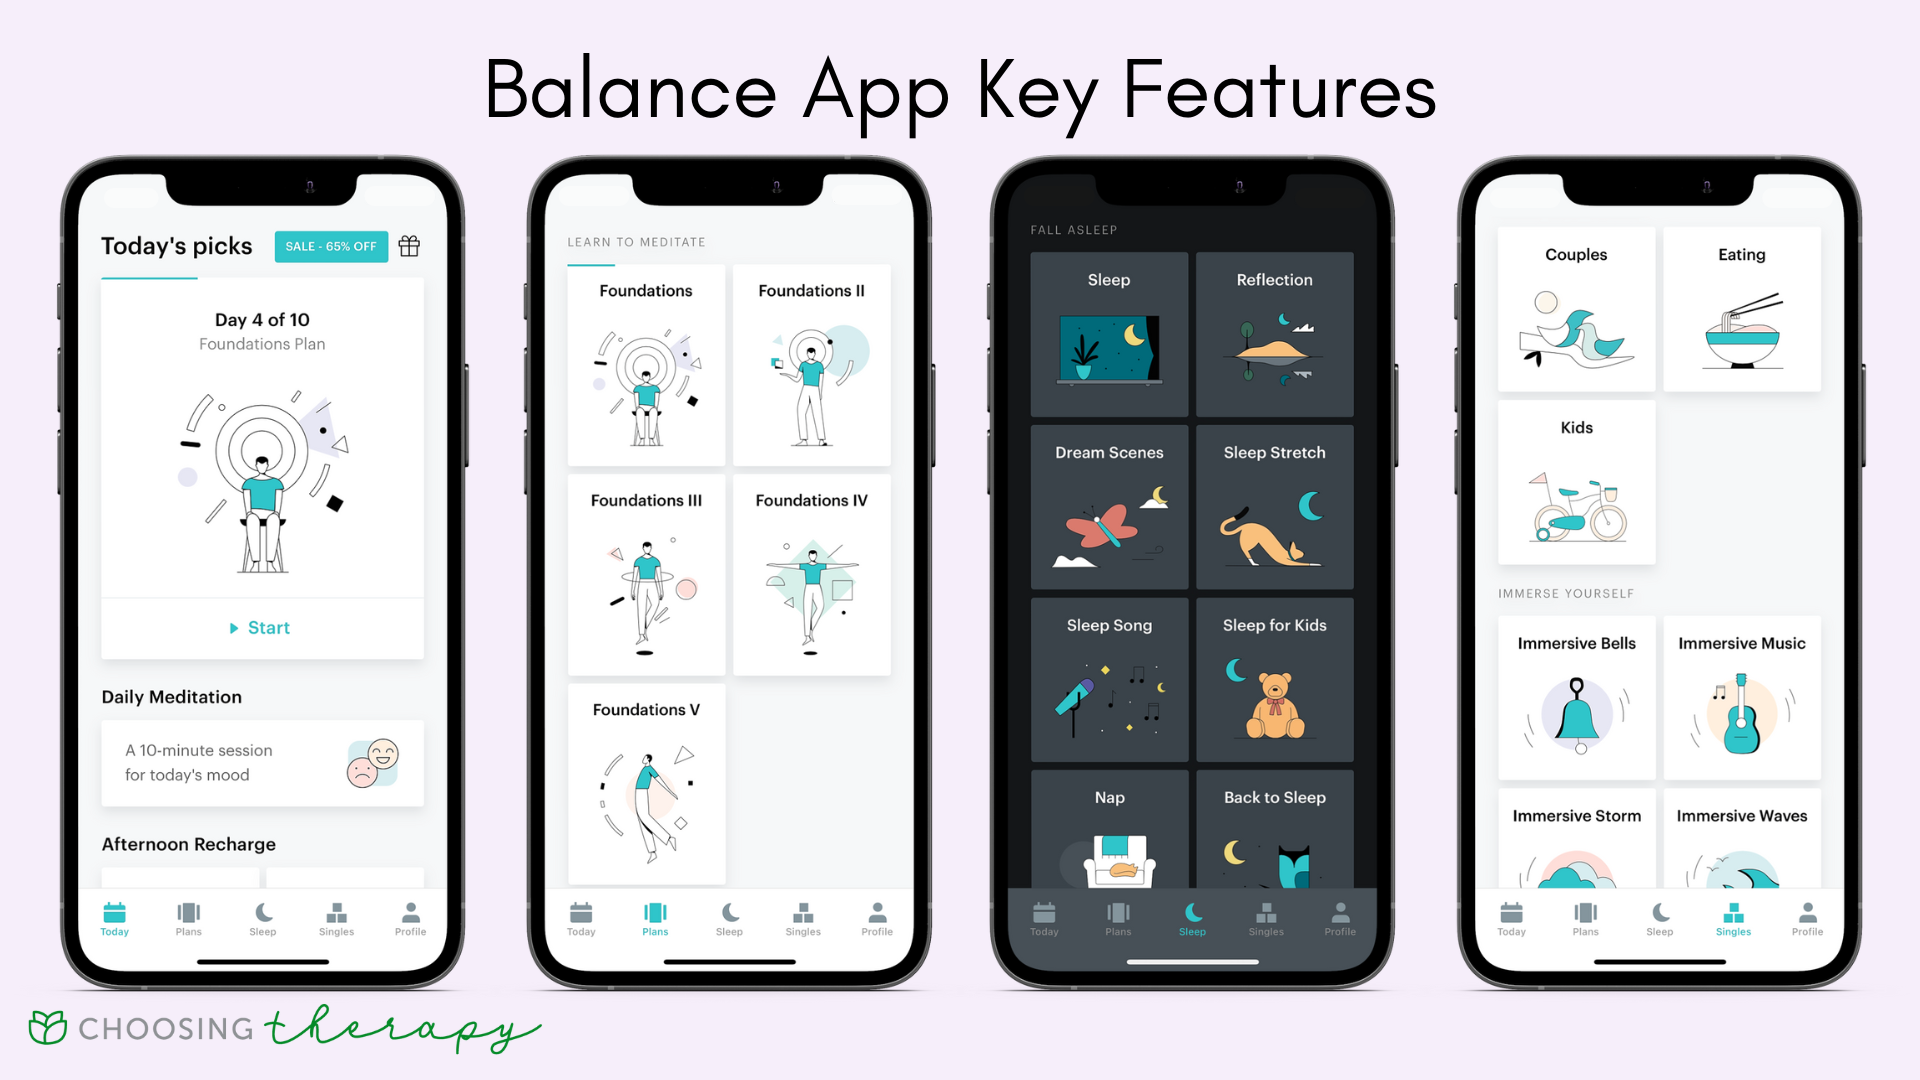 Balance App Review 2022 - Image of the key features in the Balance meditation app, daily meditation, full meditation courses, sleep sessions, and meditation sessions